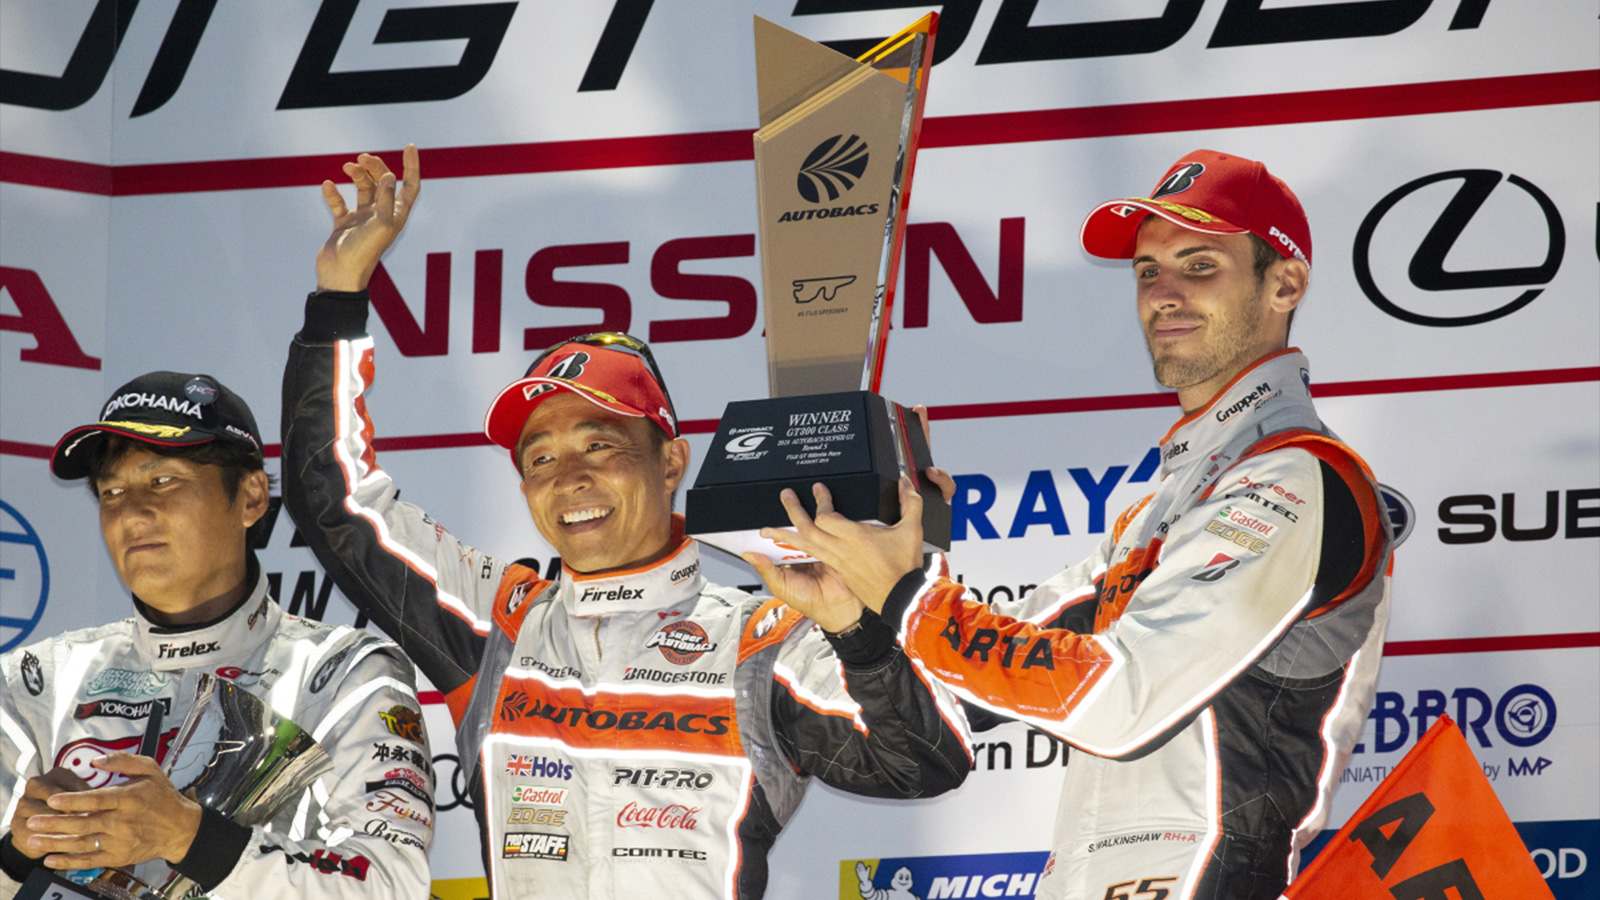 Team-mates leap back into GT300 championship lead in Japan.